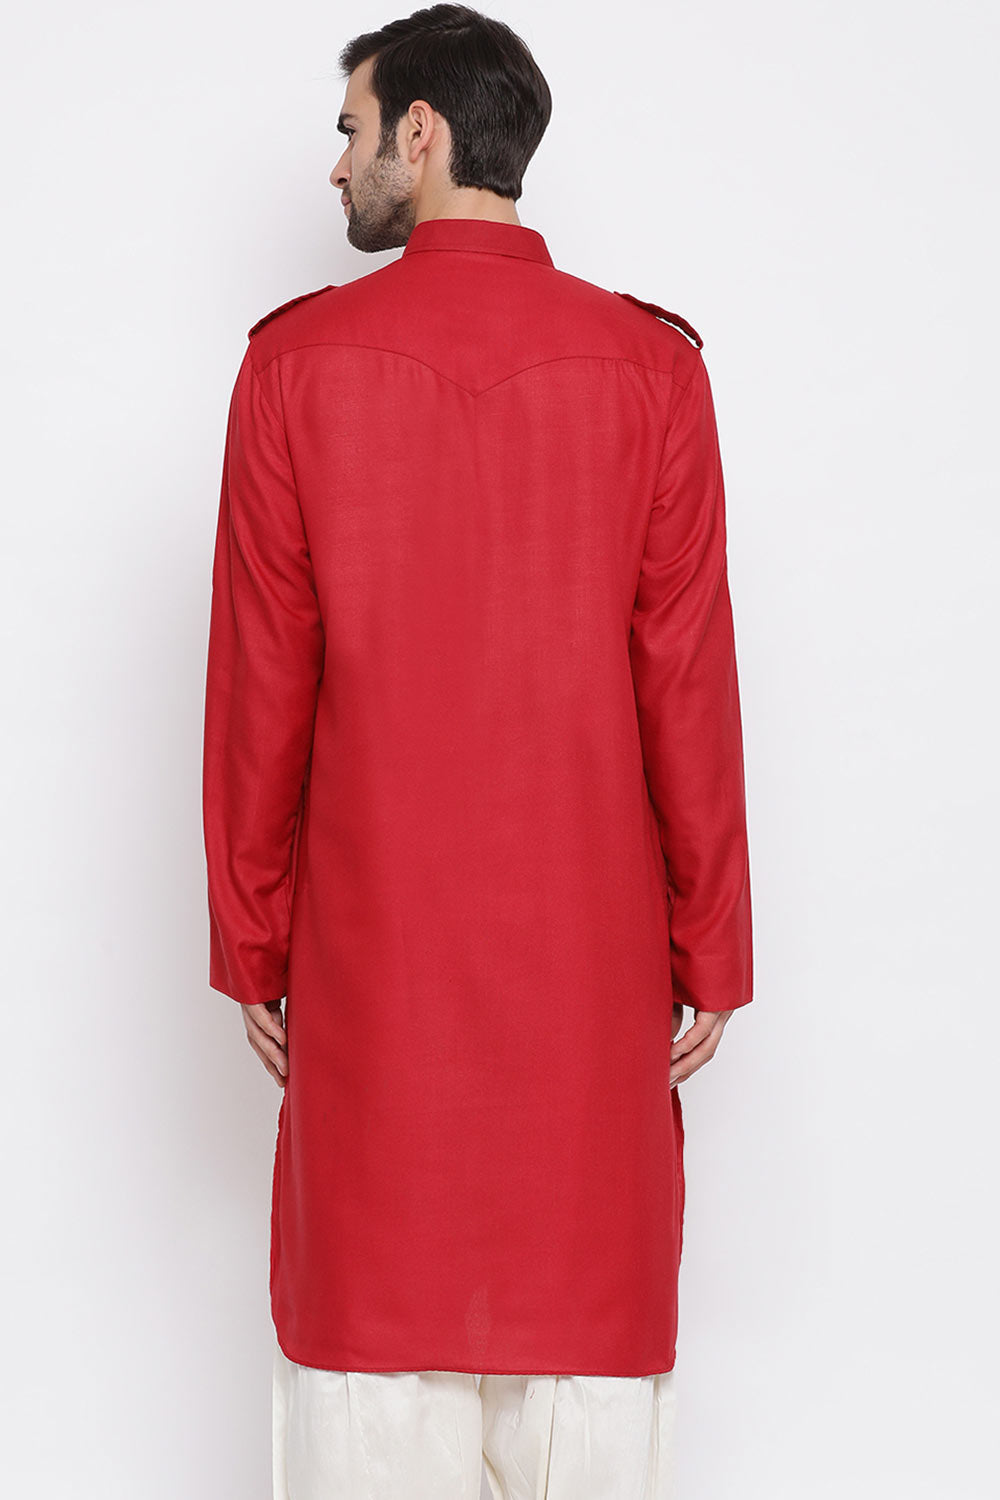 Solid Red Pathani Kurta for Festive Wear